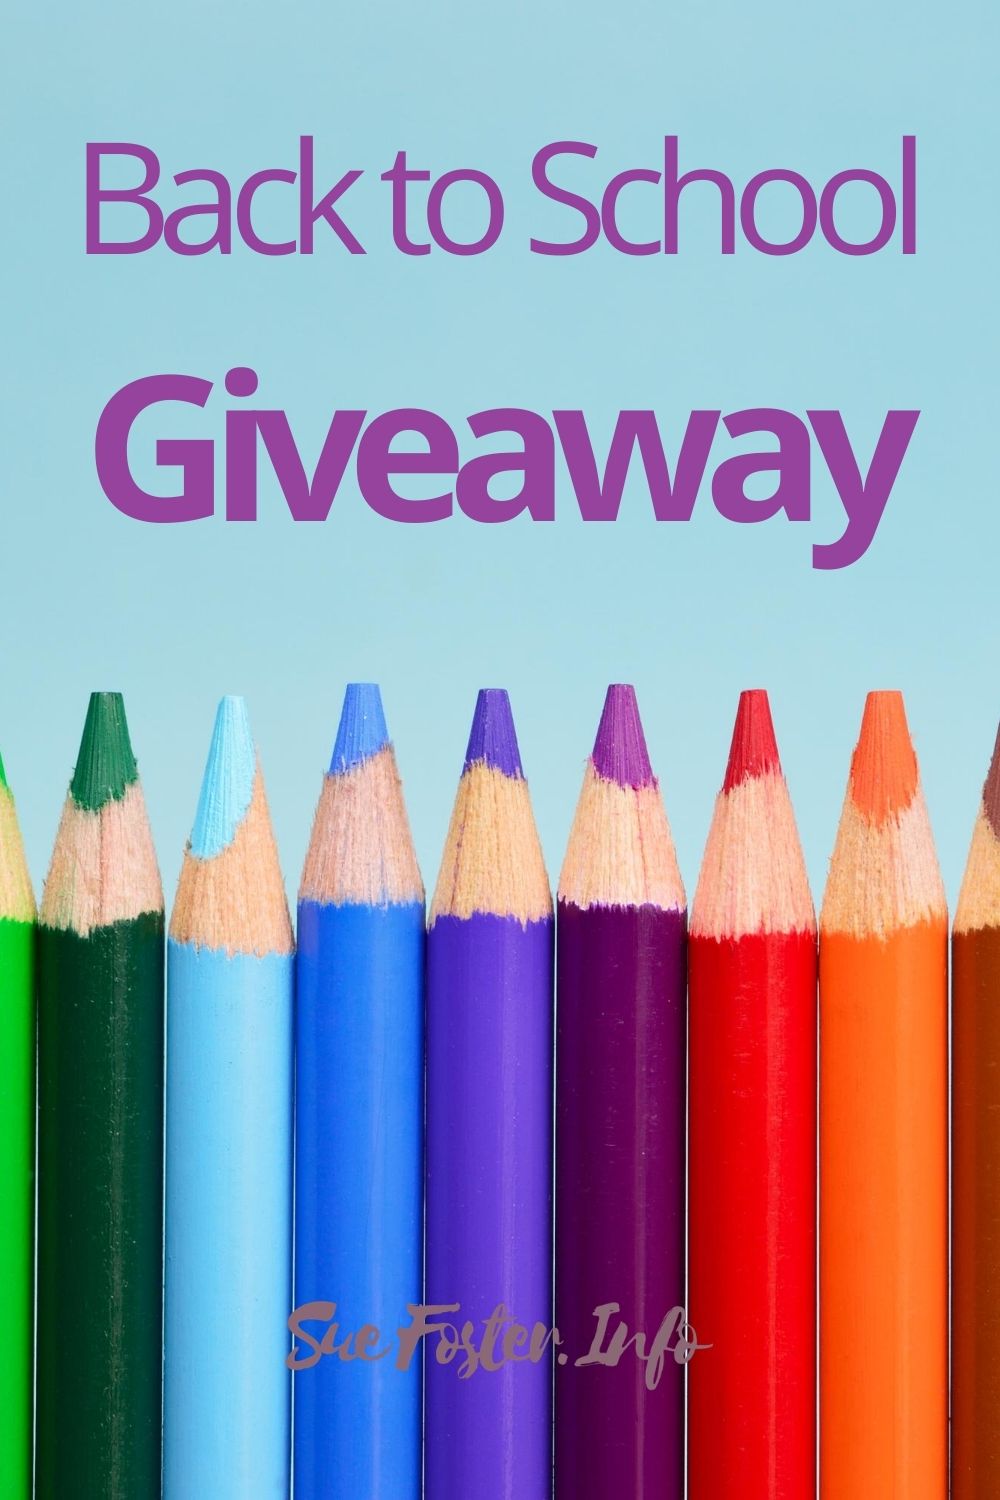 Back to school giveaway.